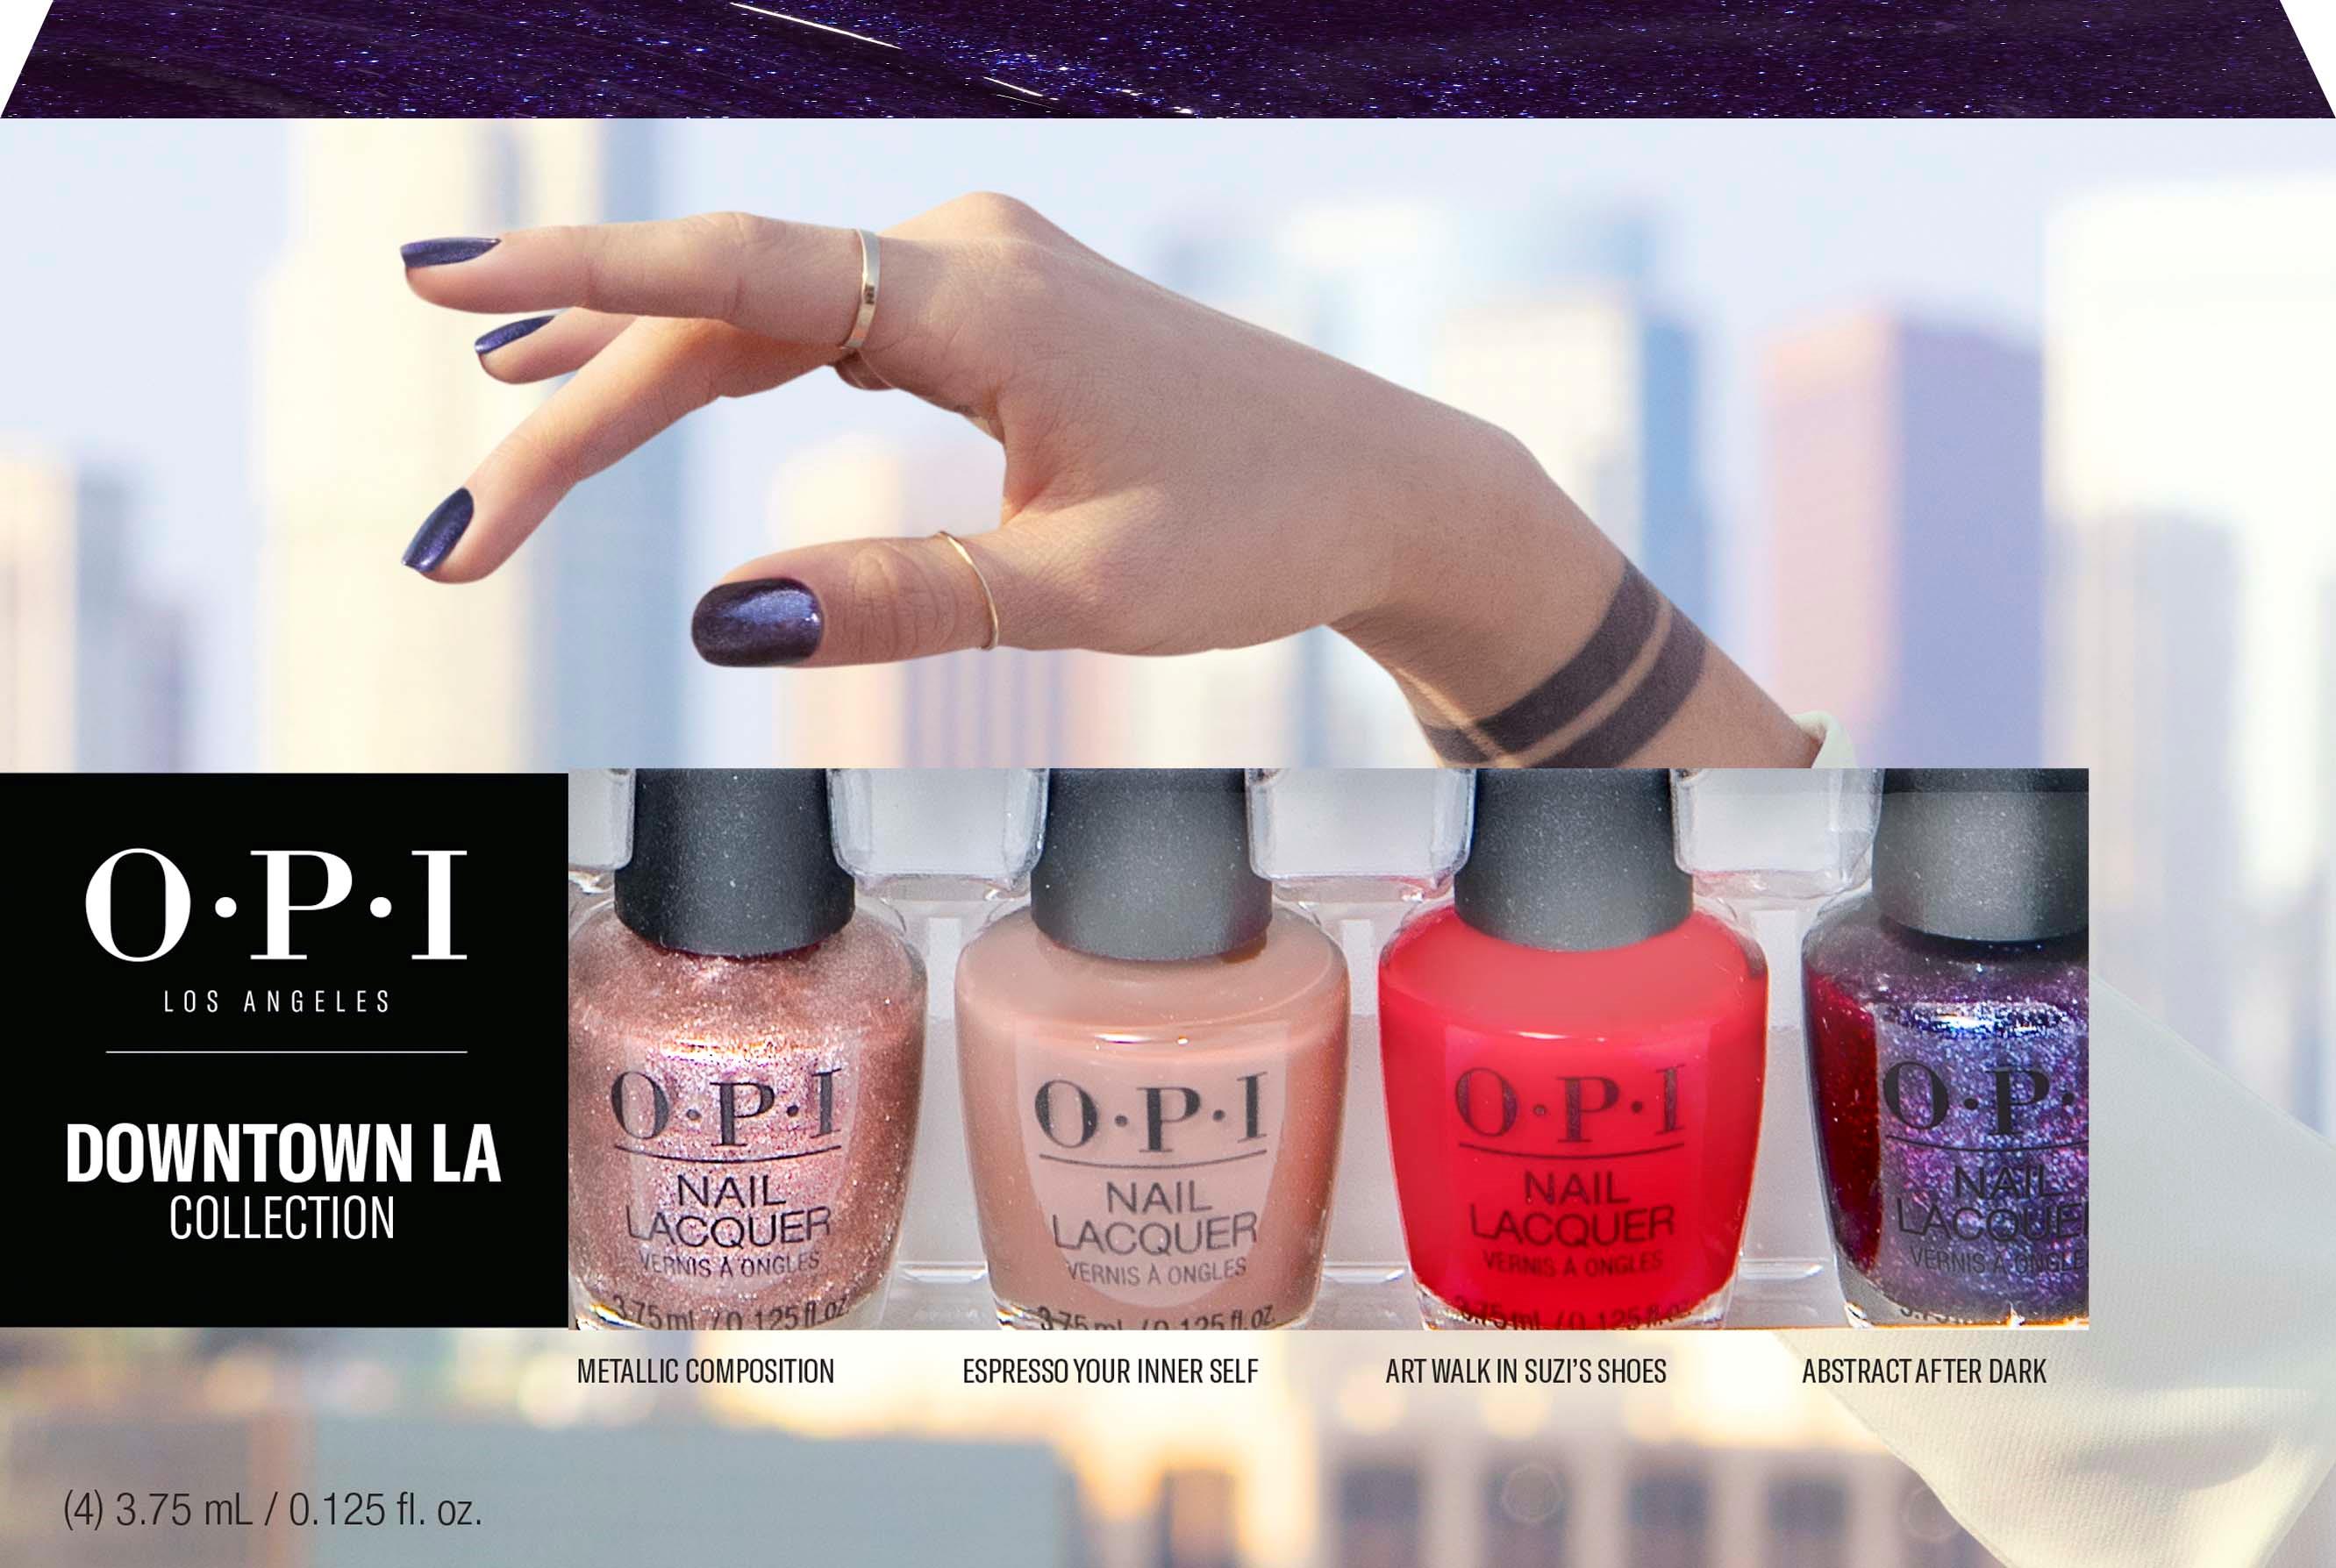 2. OPI Nail Lacquer, Stuck On You - wide 5